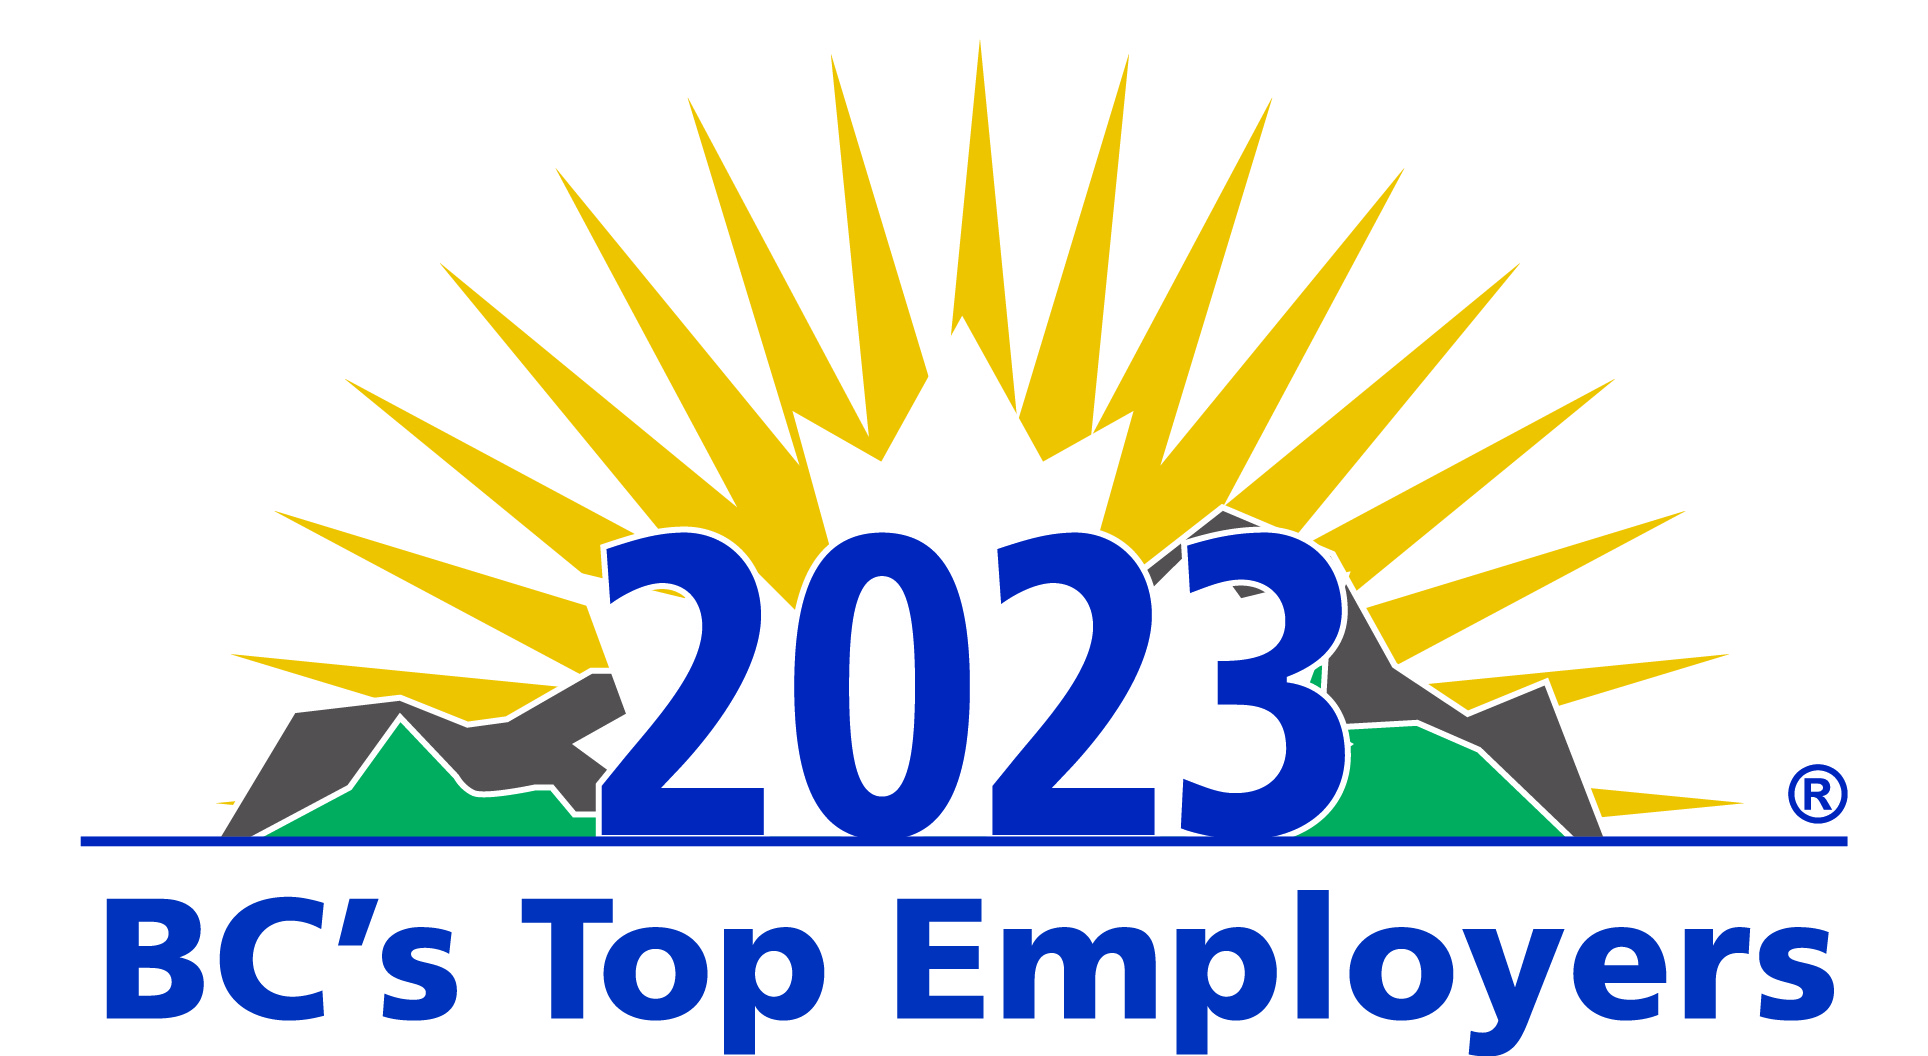 A logo with the words 2023 written out in blue, in front of various graphics including a white maple leaf, grey and green mountains and a yellow sun. The words BC's Top Employers is underneath.